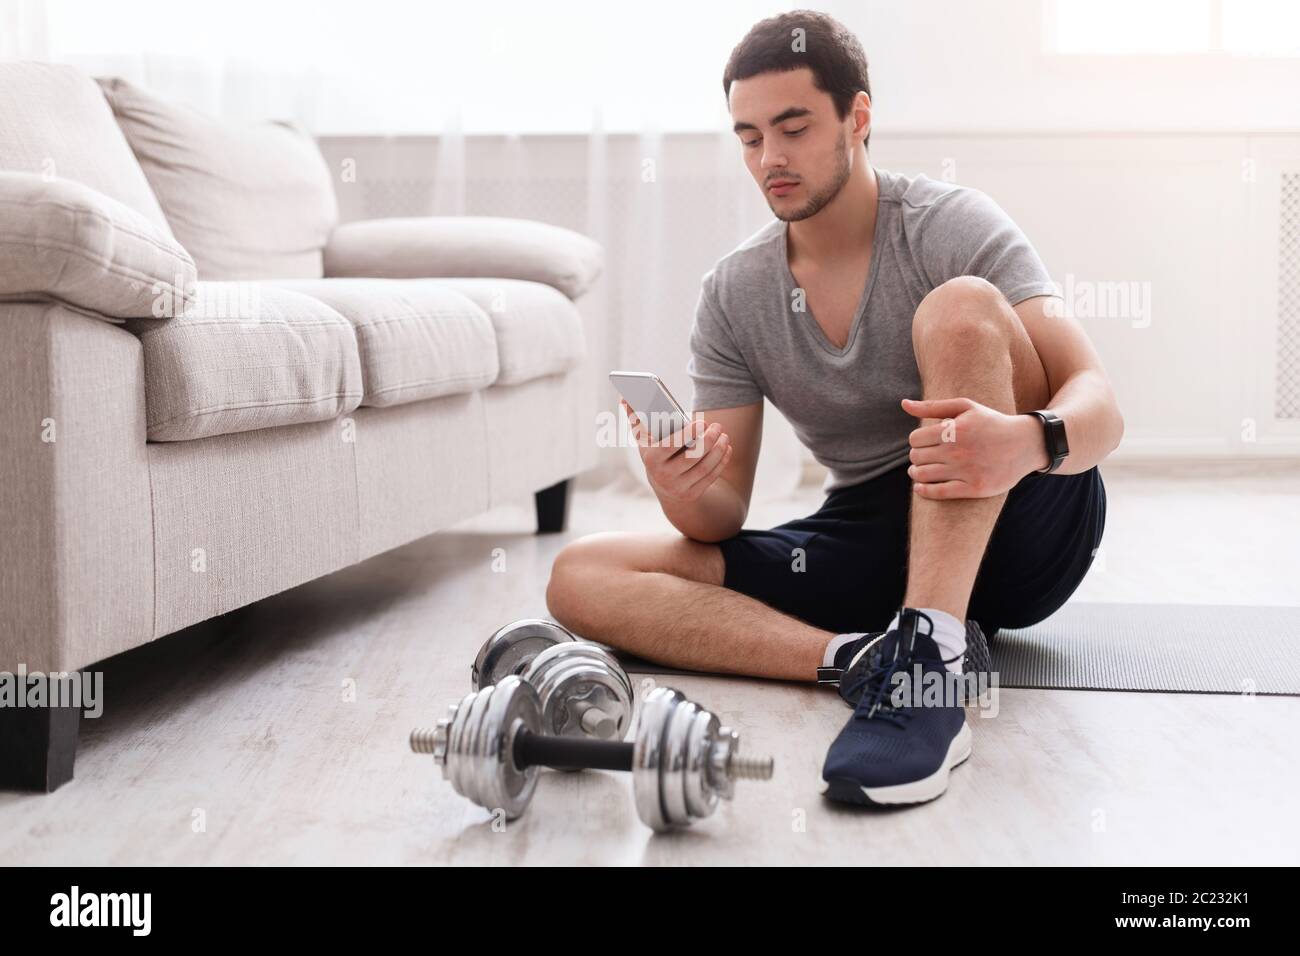 Sports equipment and activities. Man with fitness tracker sitting on floor, looking at smartphone, dumbbells near Stock Photo